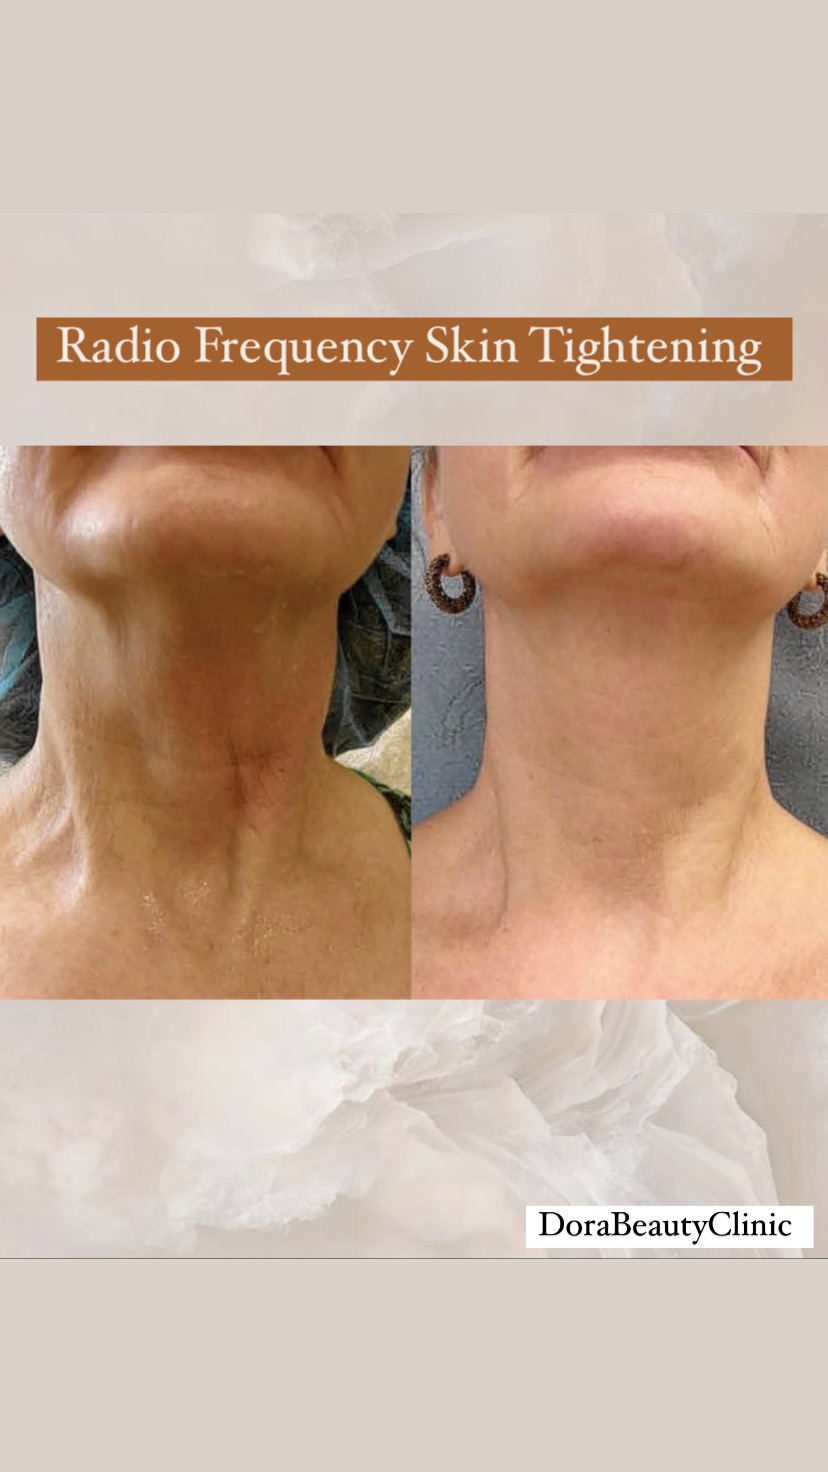 Radio Frequency Skin Tightening Before and After at Dora Beauty Clinic, London